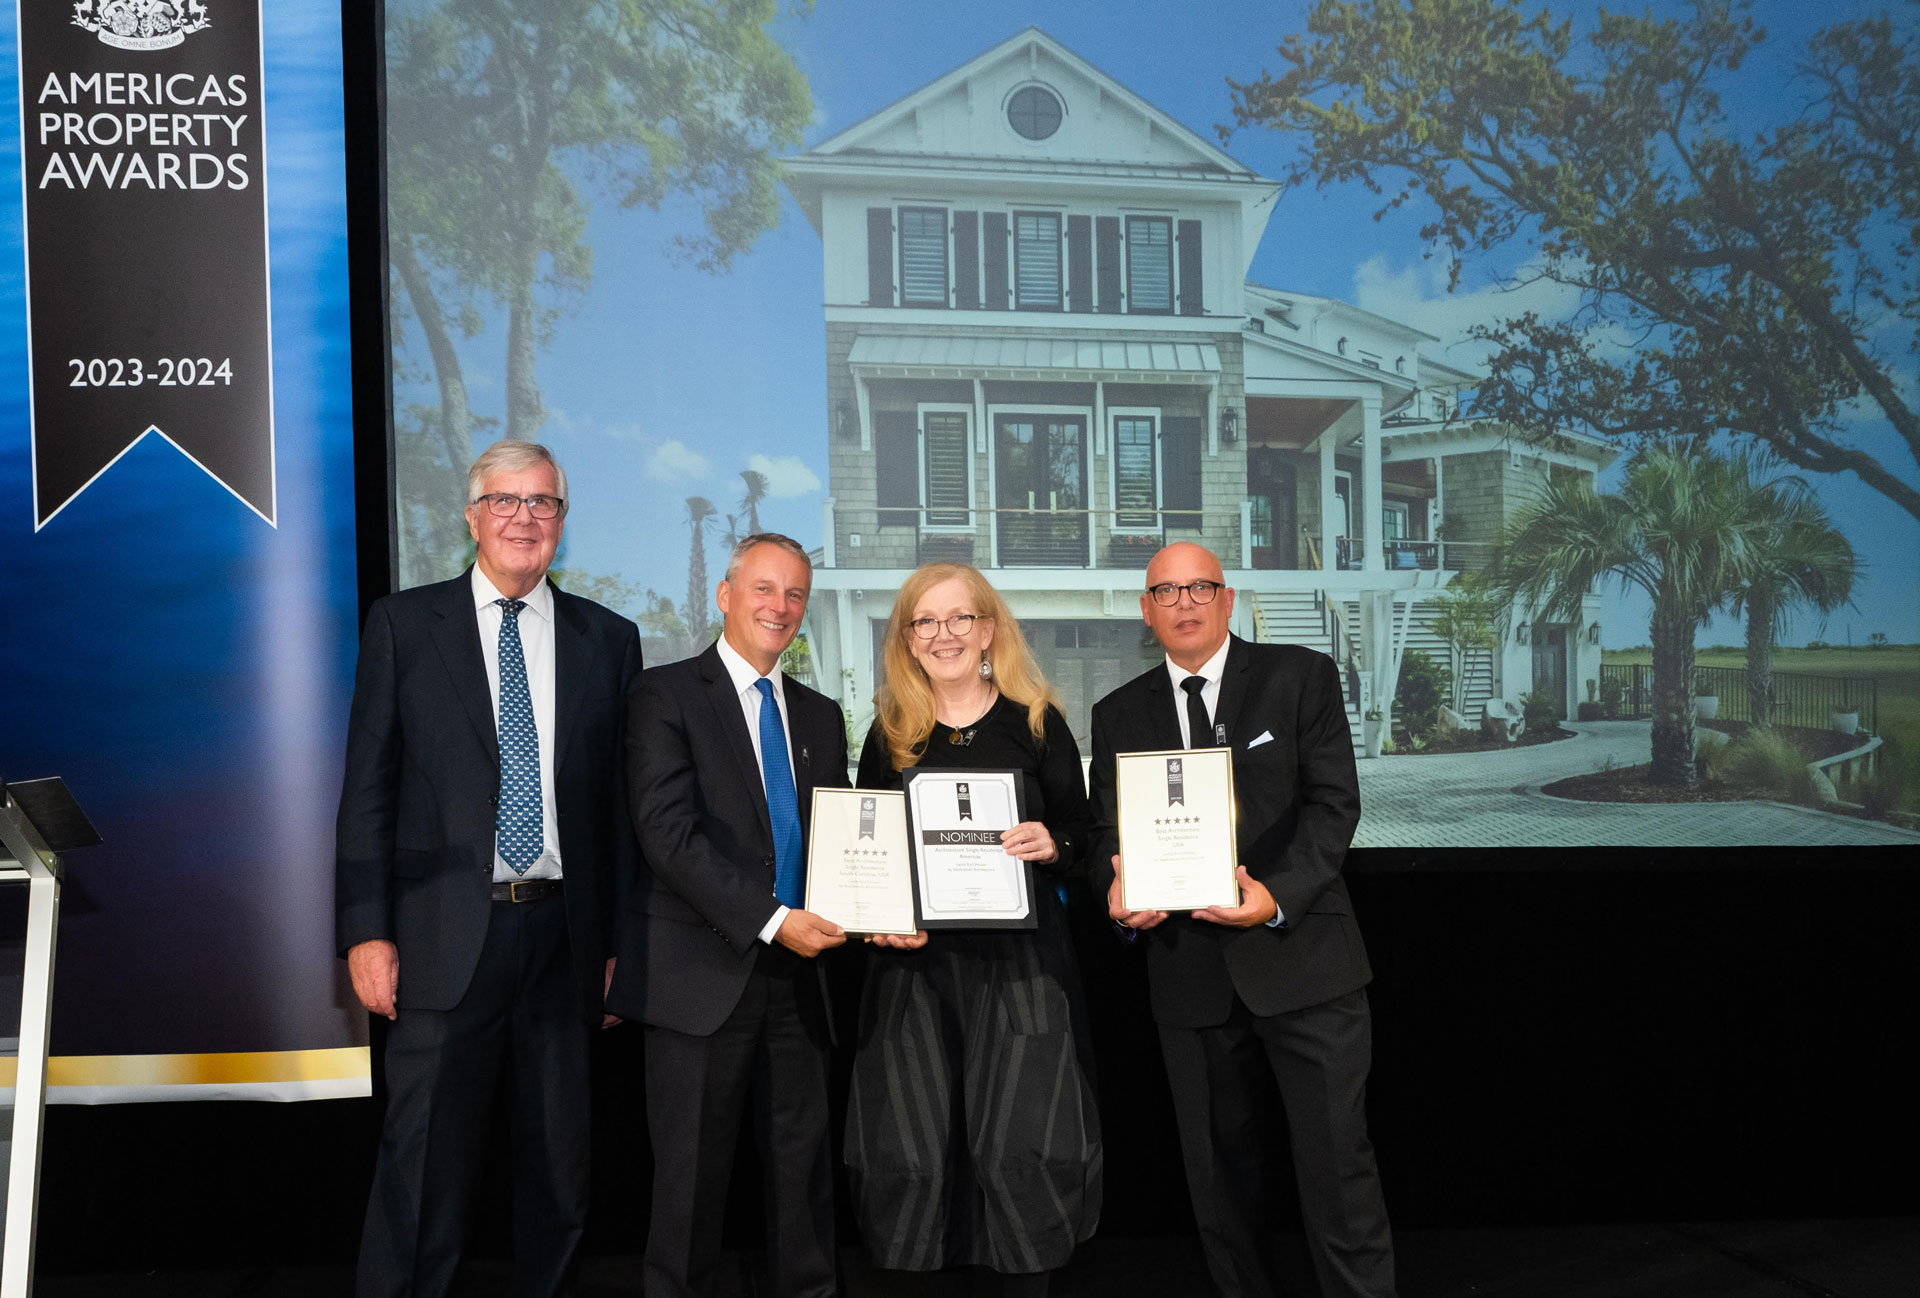 Rachel Burton of Swallowtail Architecture receives award for 2023-2024 Best Architecture in the USA from The presenters of the awards on the evening were: IPA Operations Director Paul Wright, UK's Lord Waverley and Canadian Senator David Wells